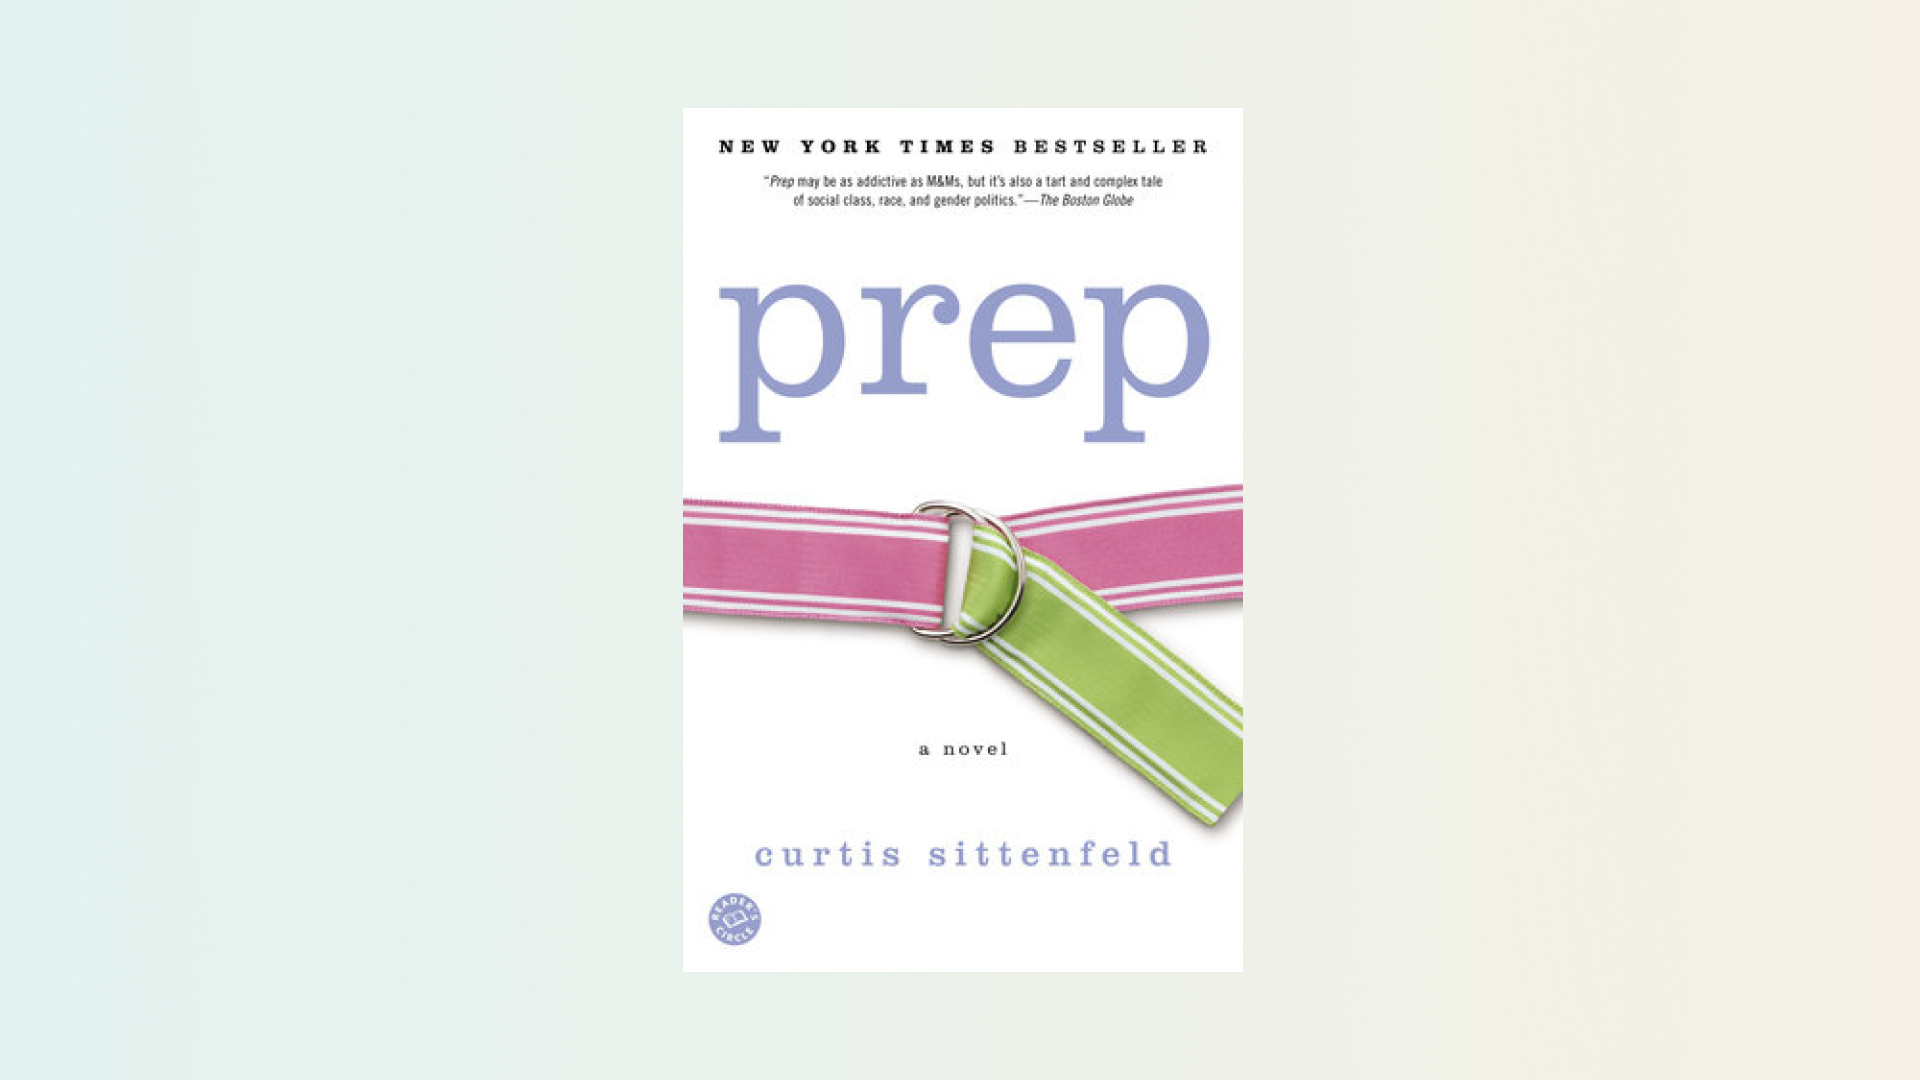 “Prep” by Curtis Sittenfeld